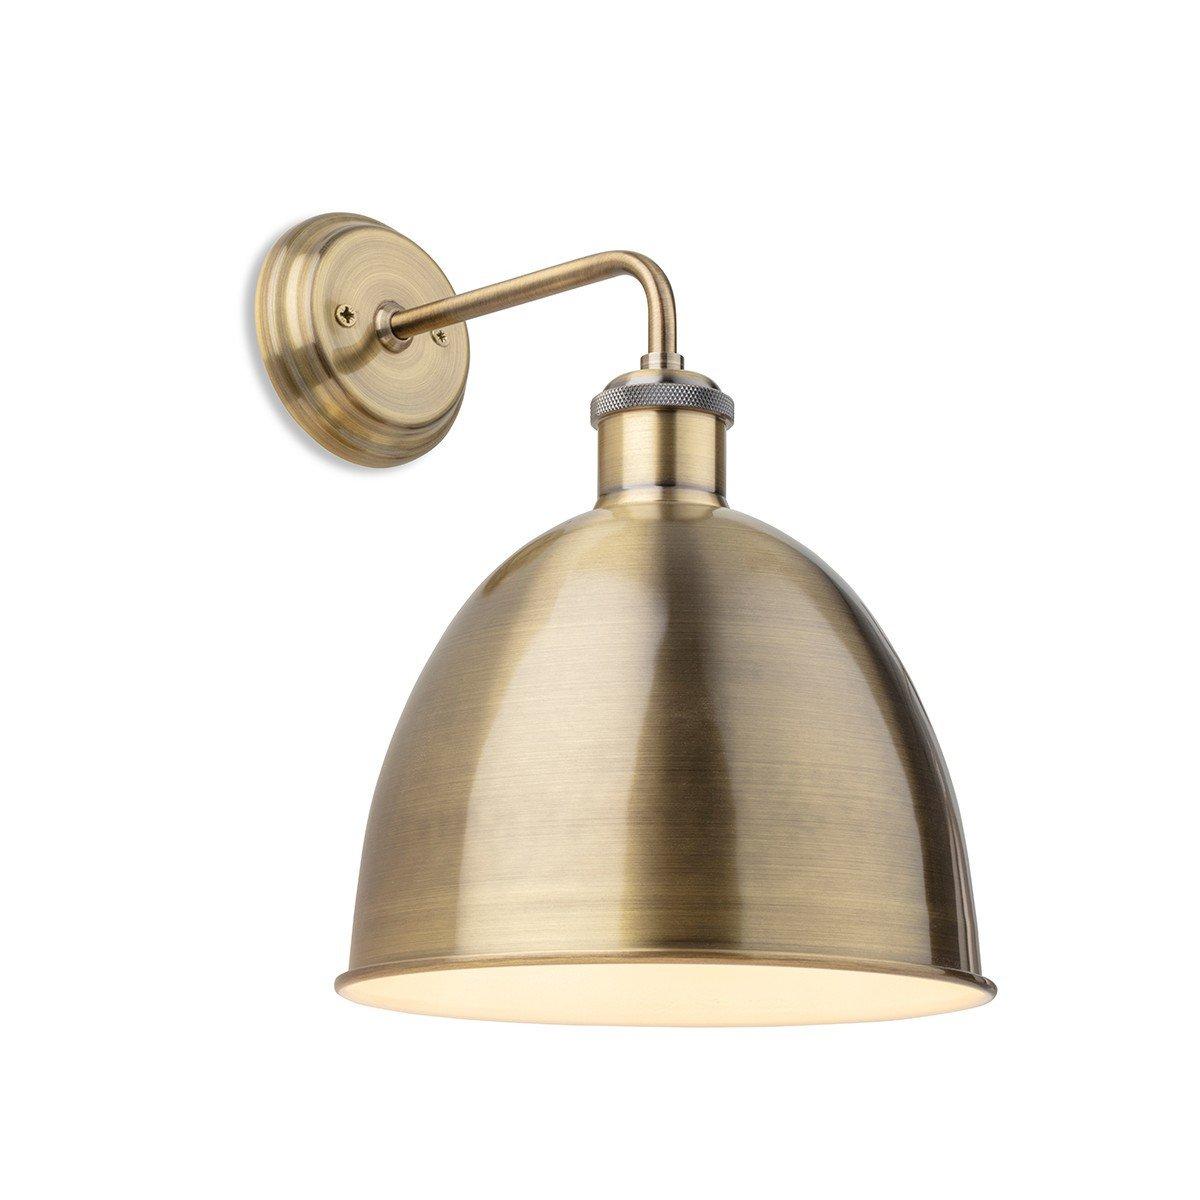 Genoa Industrial Dome Wall Light Antique Brass